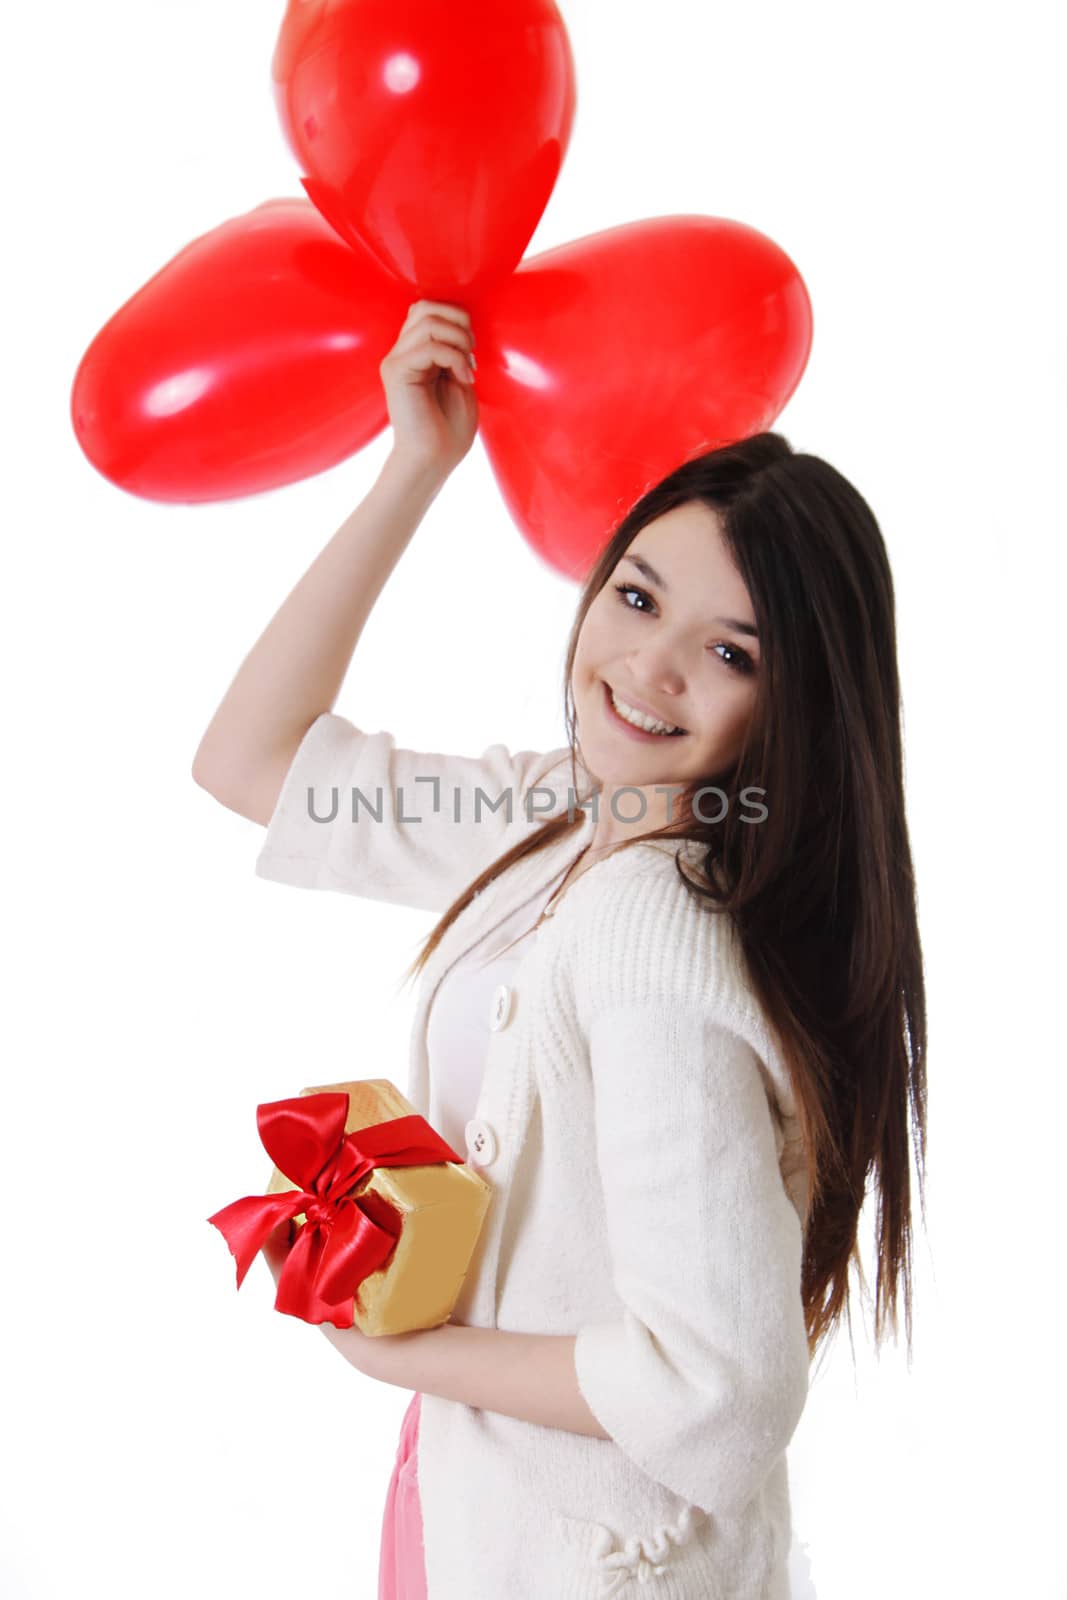 Smiling girl with red balloons and gift by Angel_a